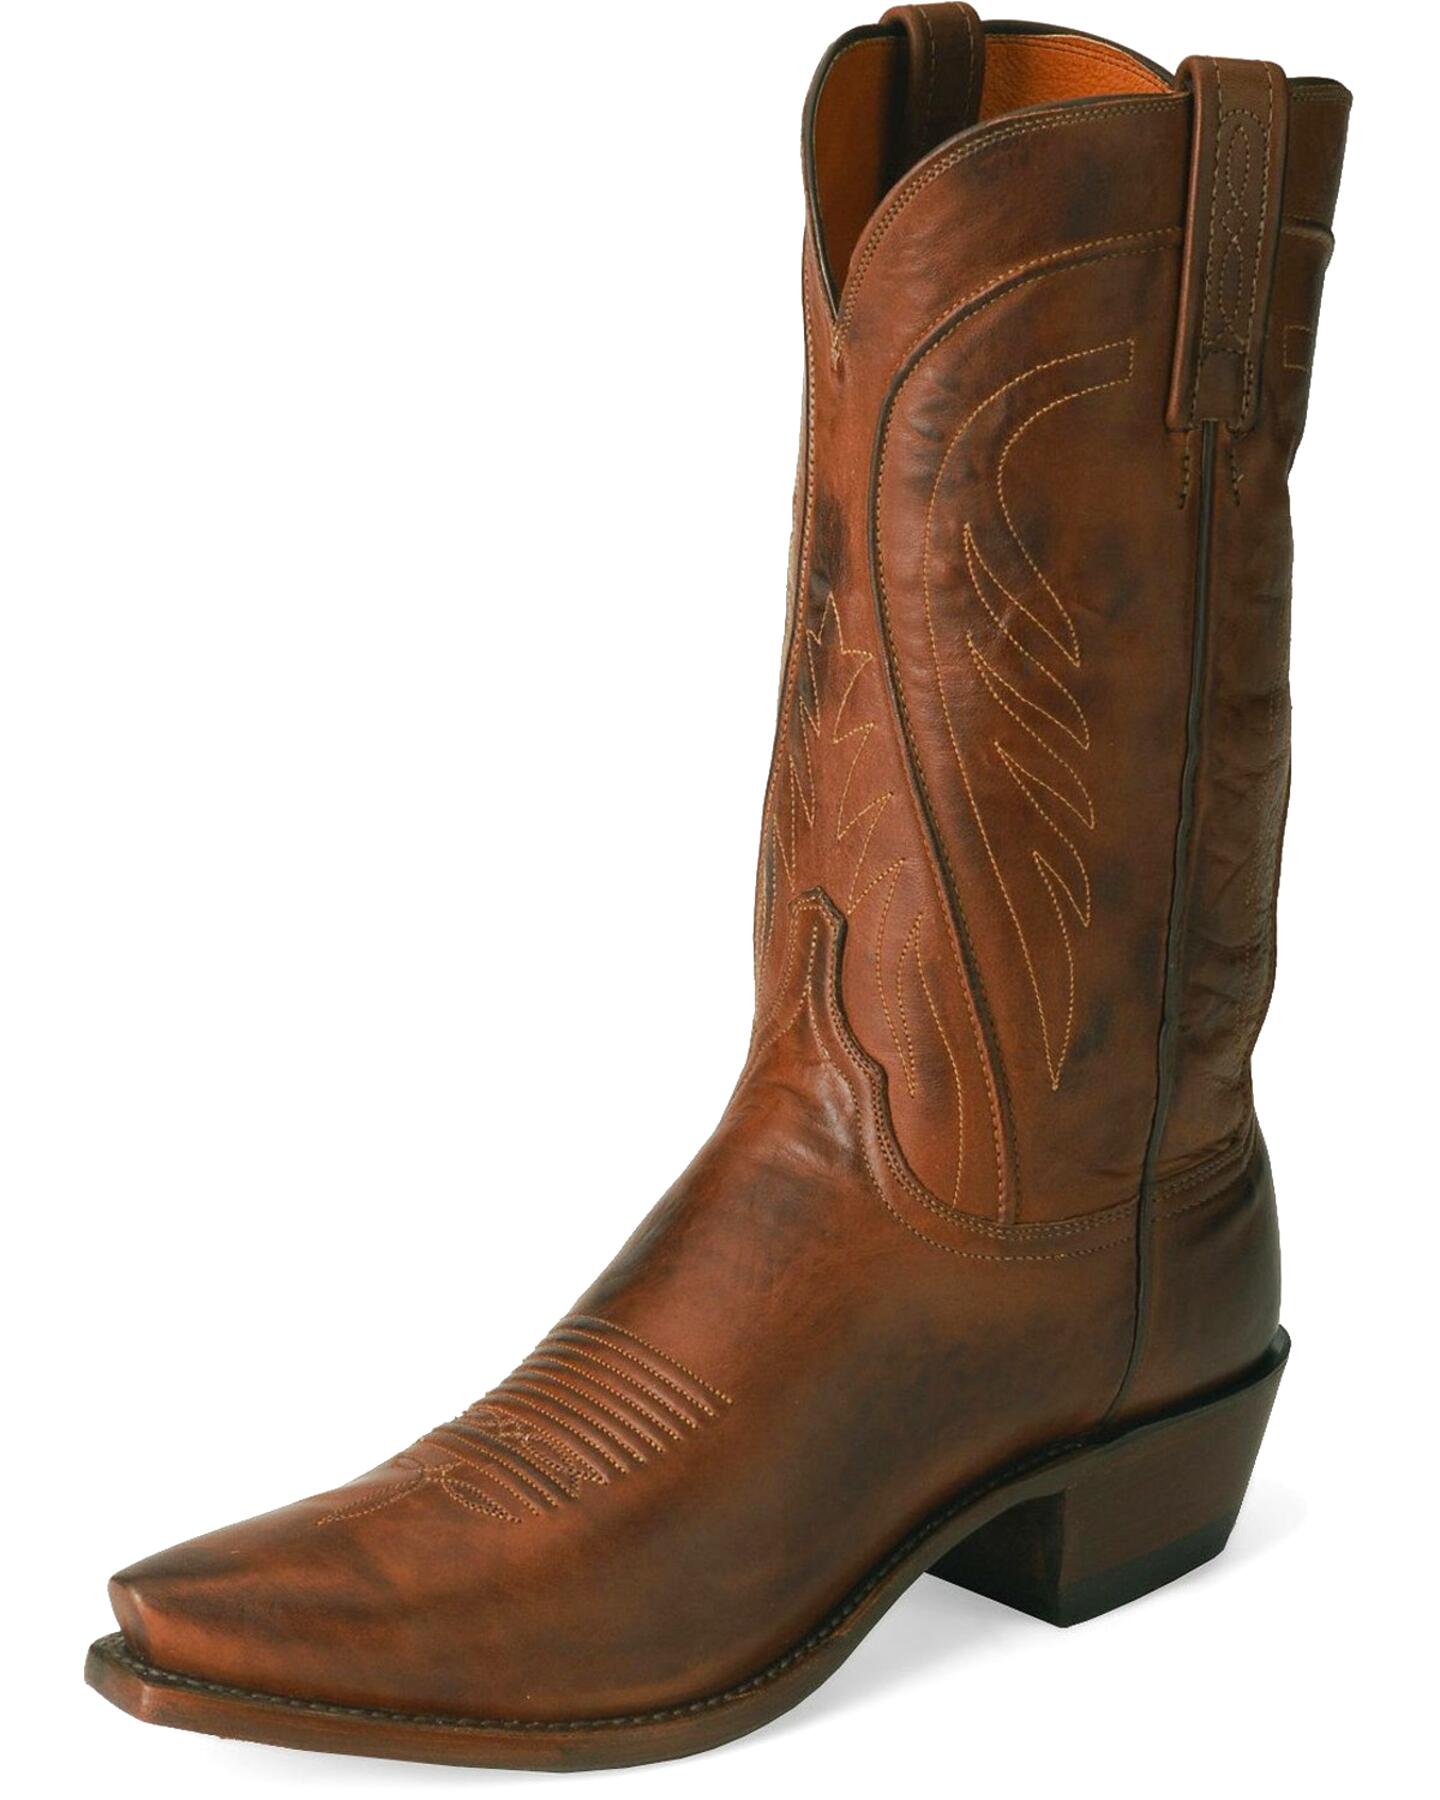 Lucchese Cowboy Boots for sale in UK | 60 used Lucchese Cowboy Boots